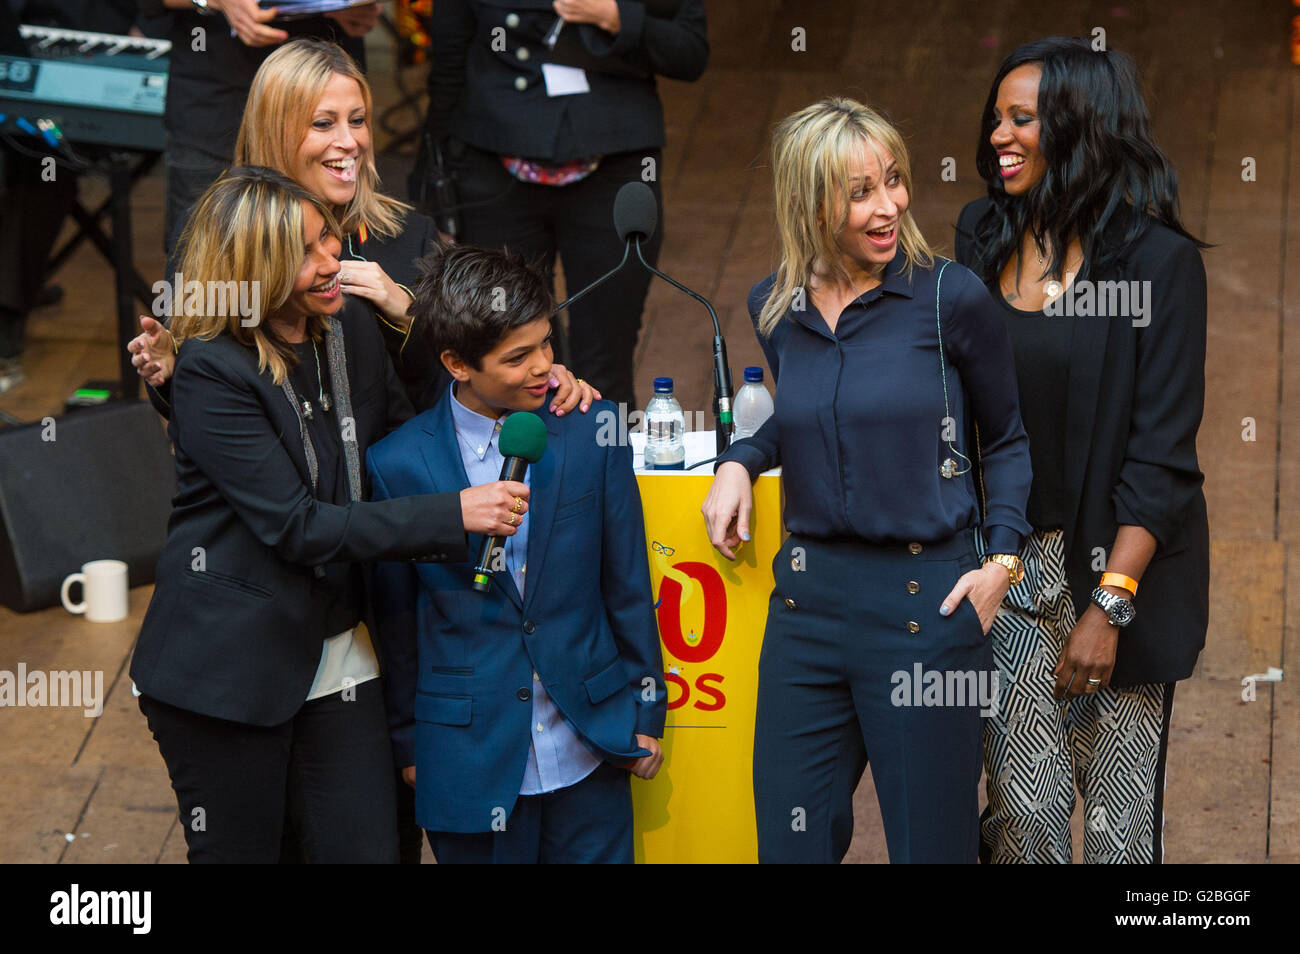 All Saints members (left to right) Melanie Blatt, Nicole Appleton, Natalie Appleton and Shaznay Lewis with an award winner during the live broadcast of the final of BBC Radio 2's 500 Words creative writing competition at Shakespeare's Globe in London. Stock Photo